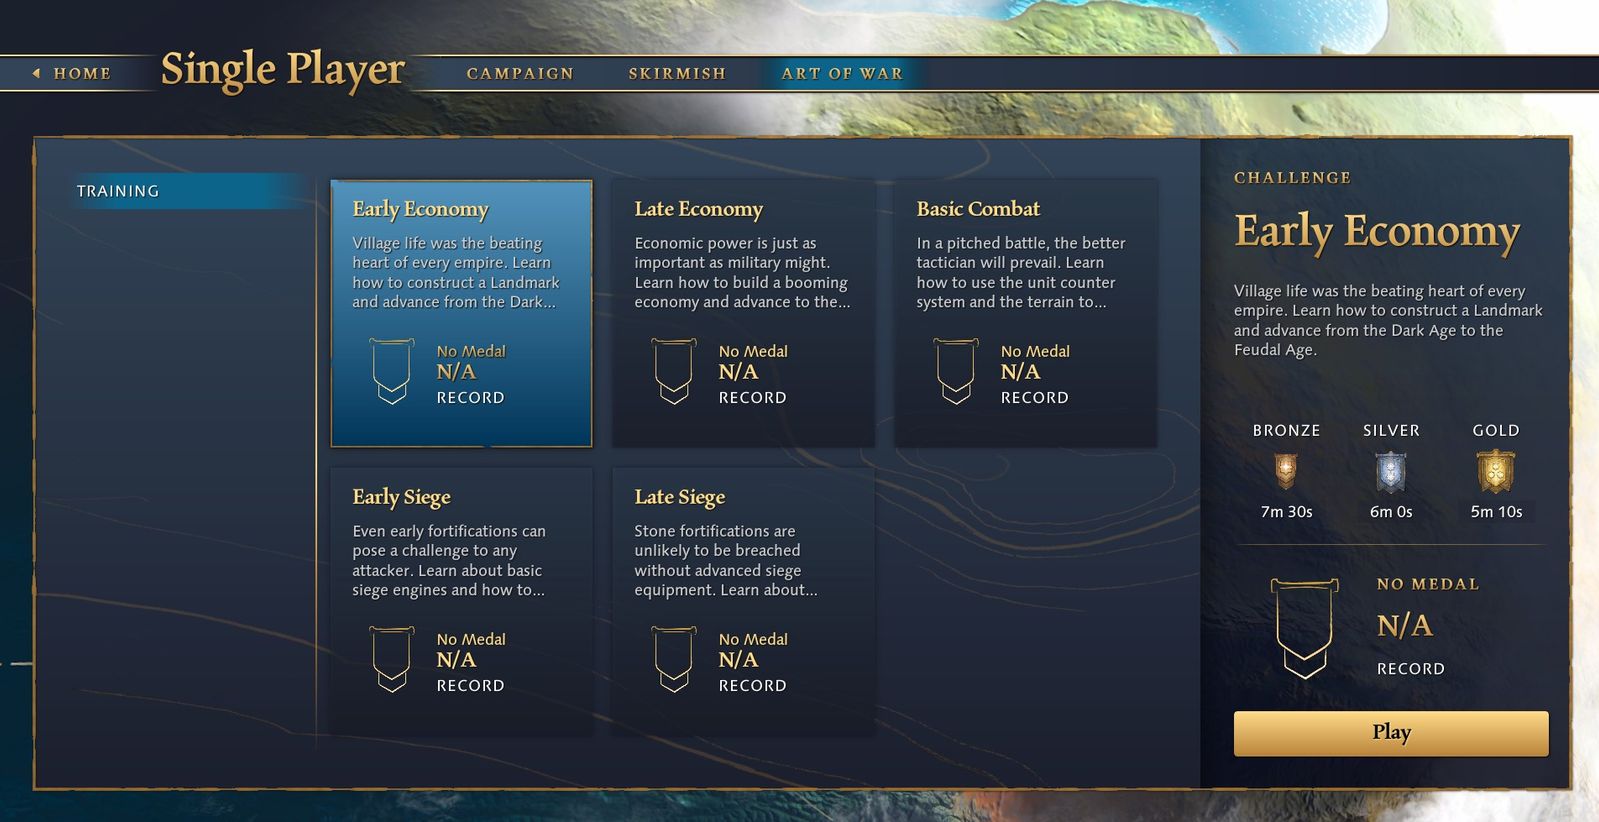 The menu for the Art of War mode in Age of Empires 4.